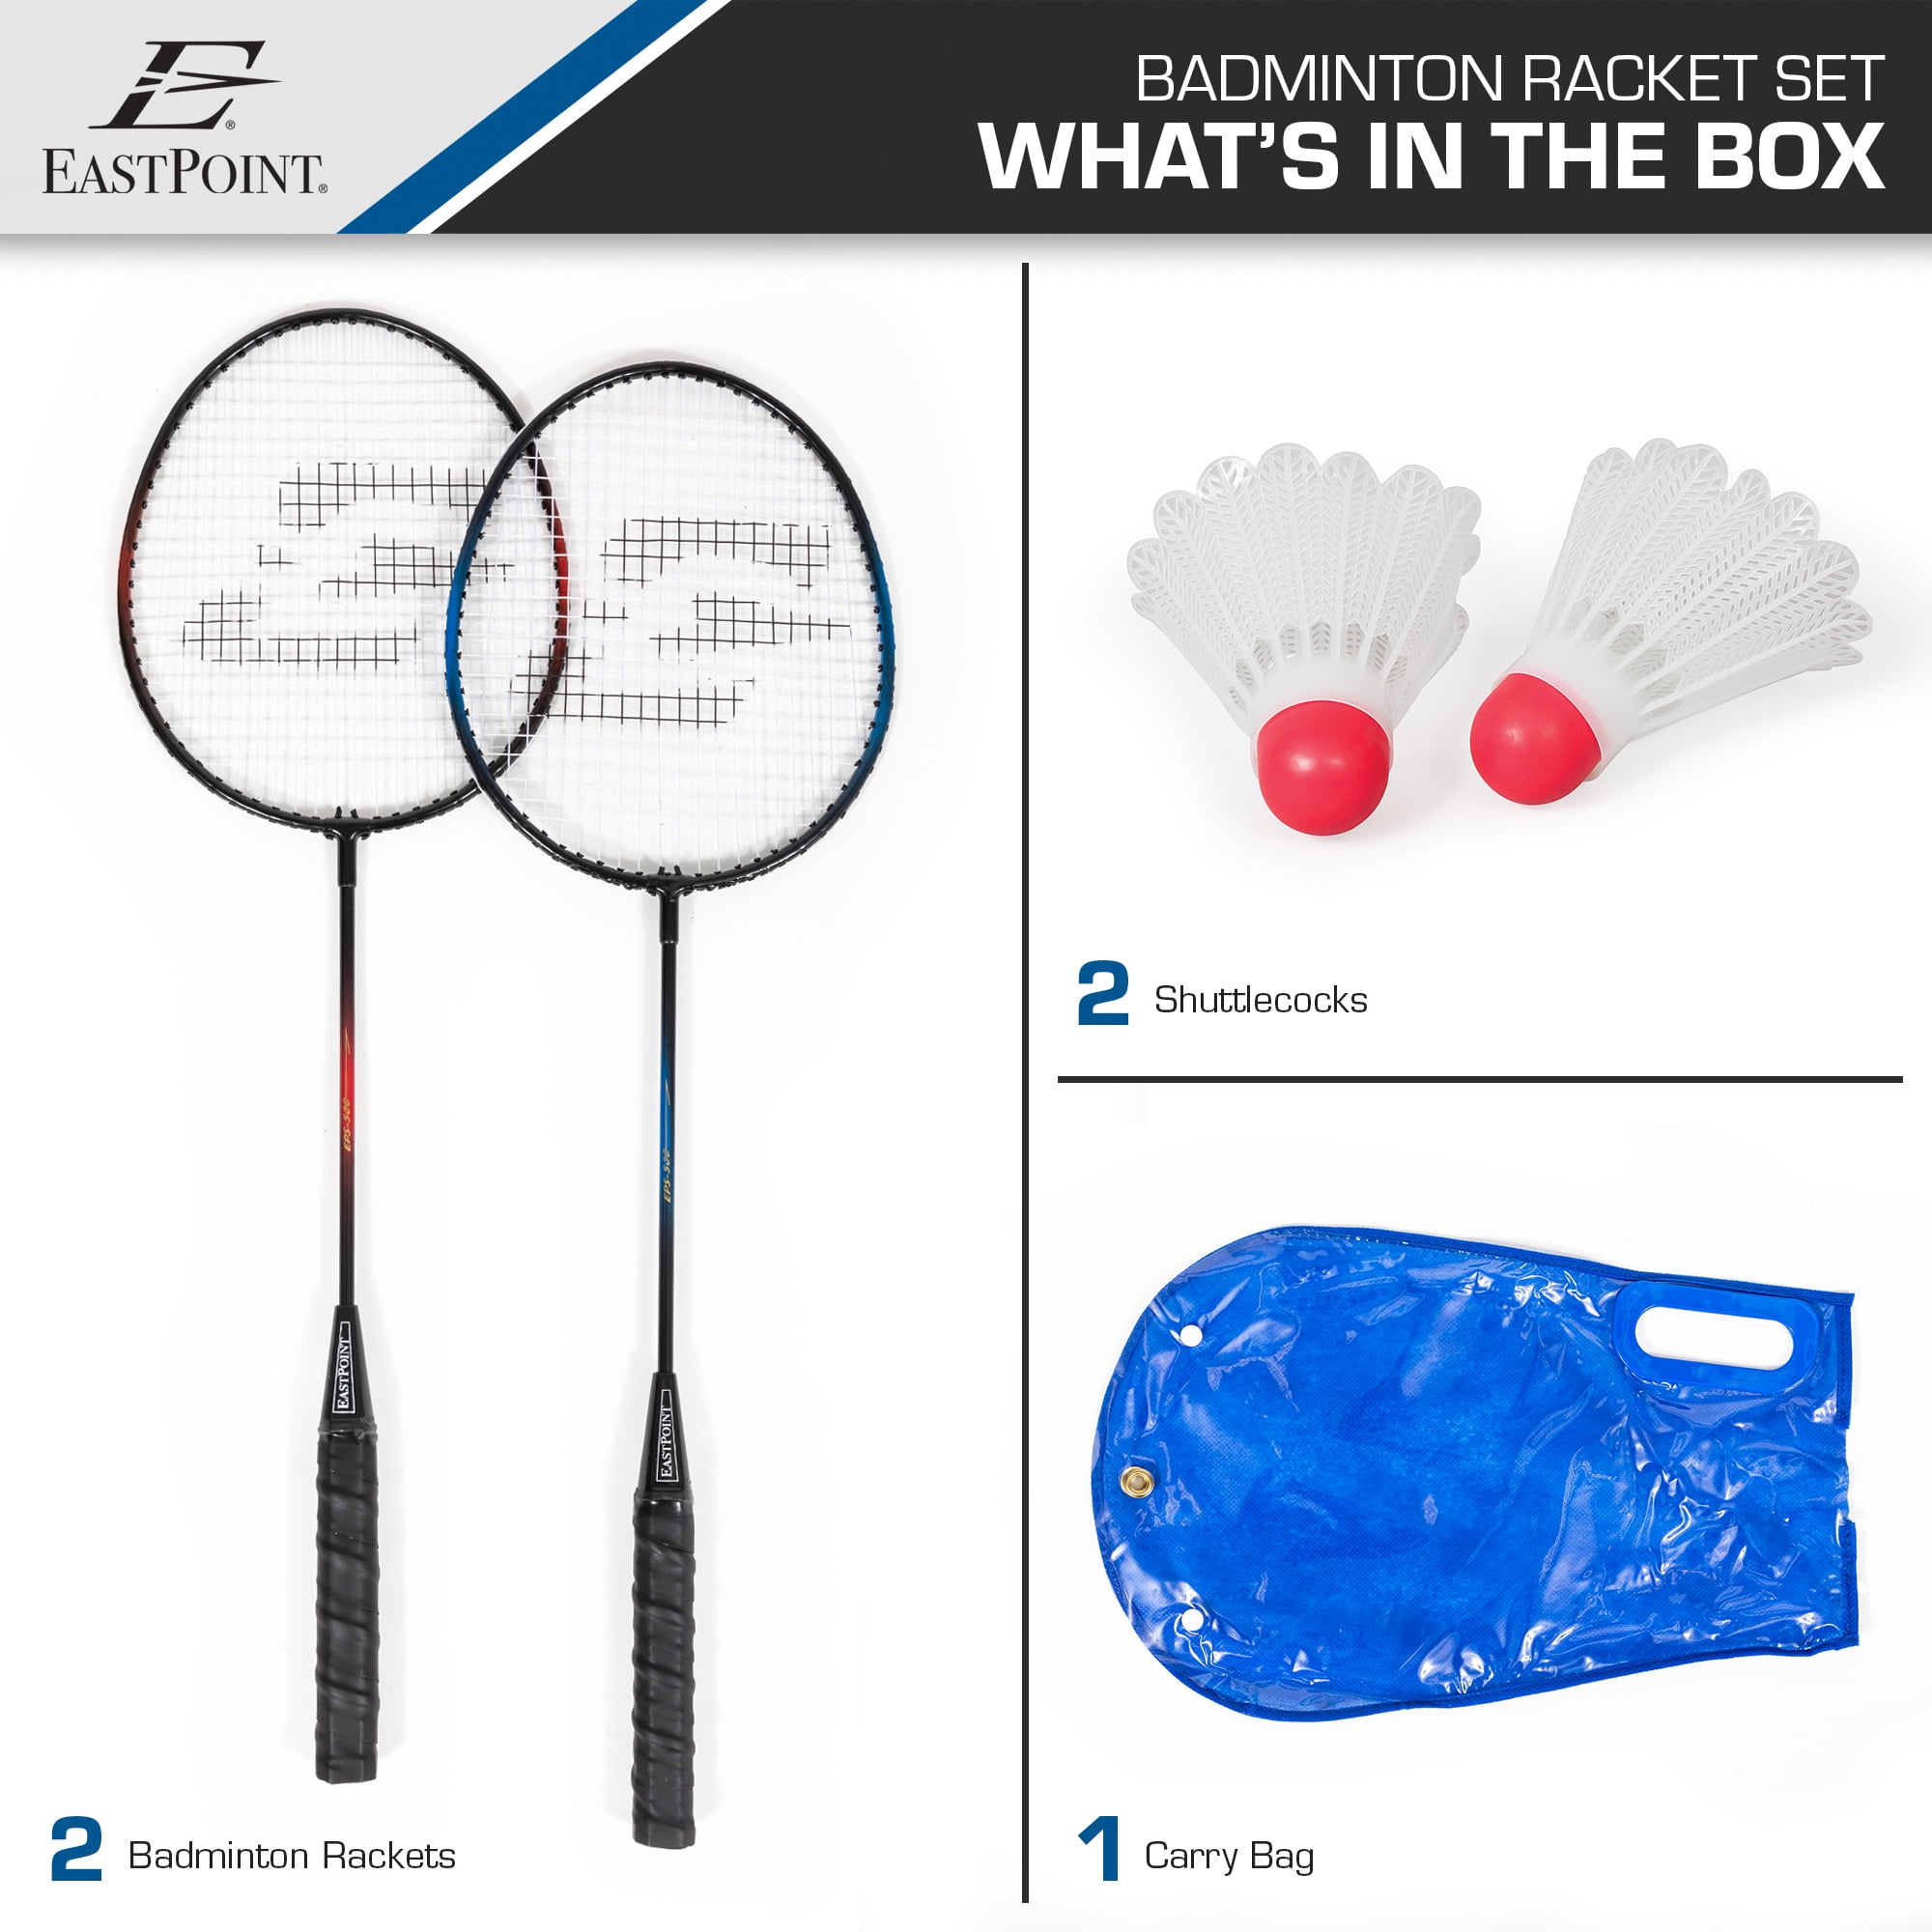 Sports 2 Player Badminton Racket Set Includes 2 Racquets and 2 Shuttlecocks